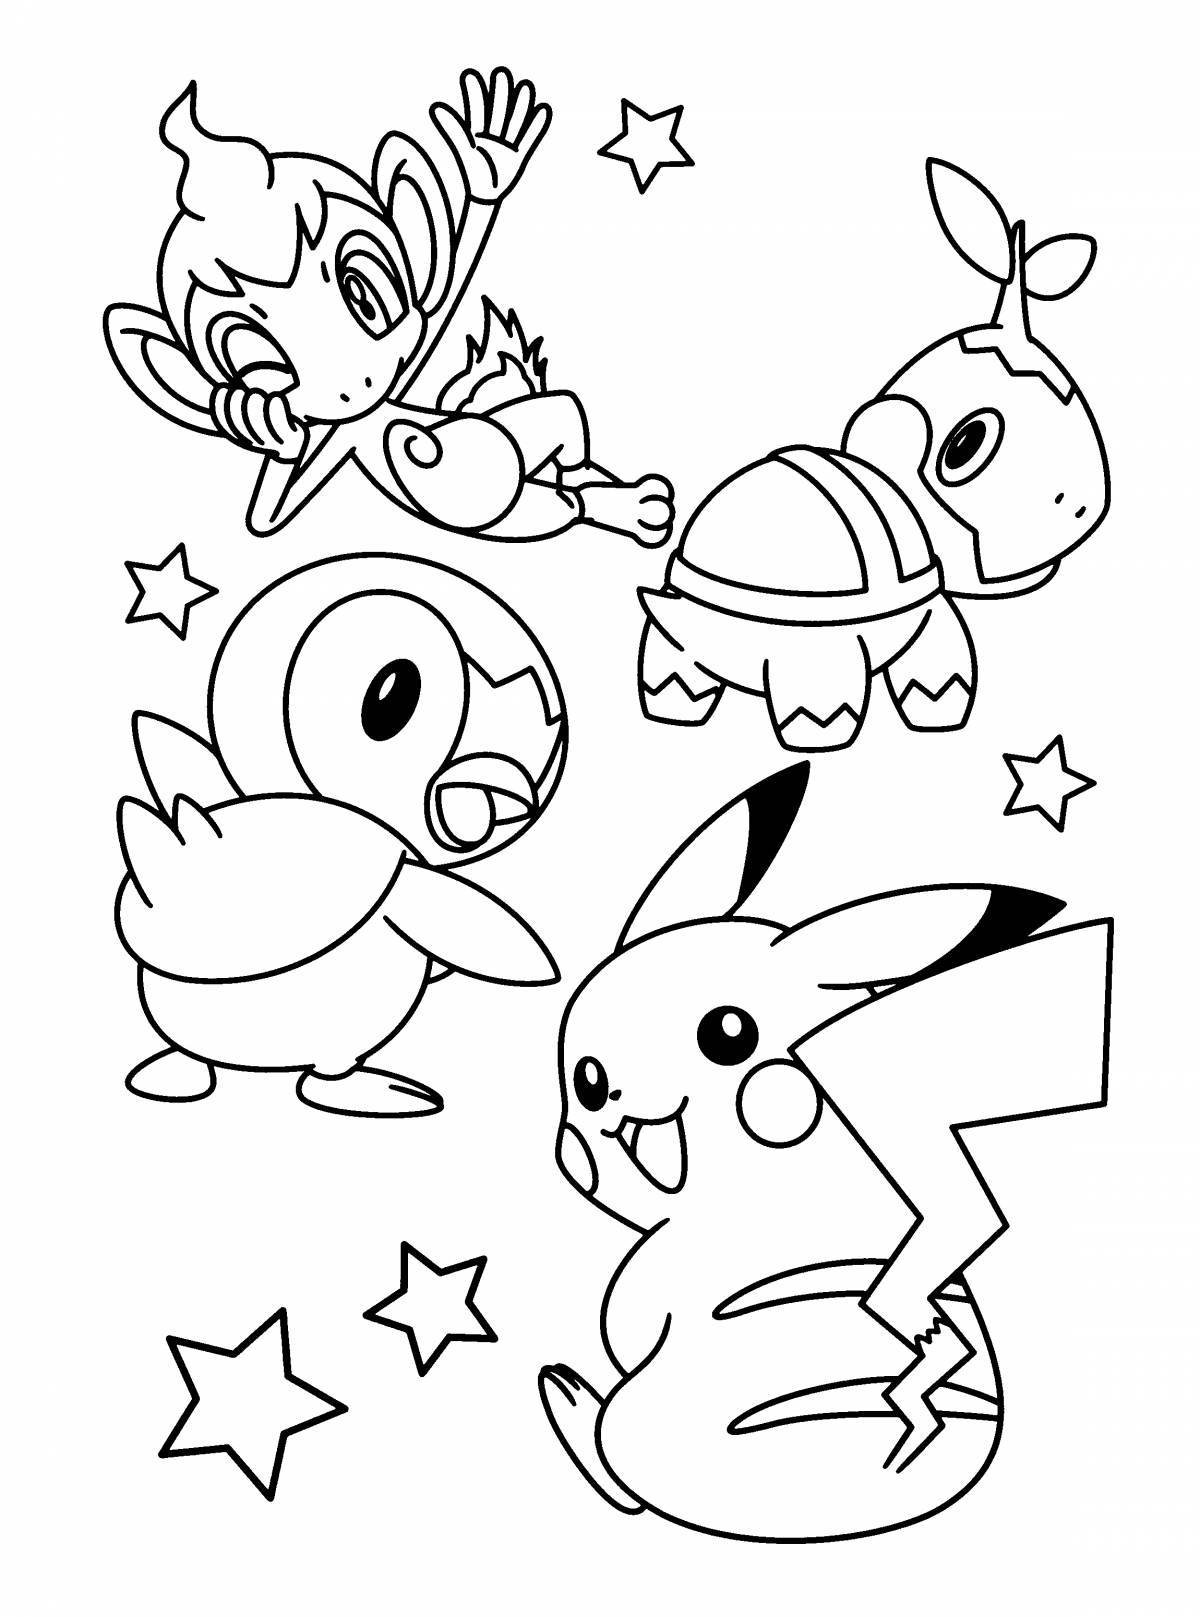 Outstanding pikachu coloring book for kids